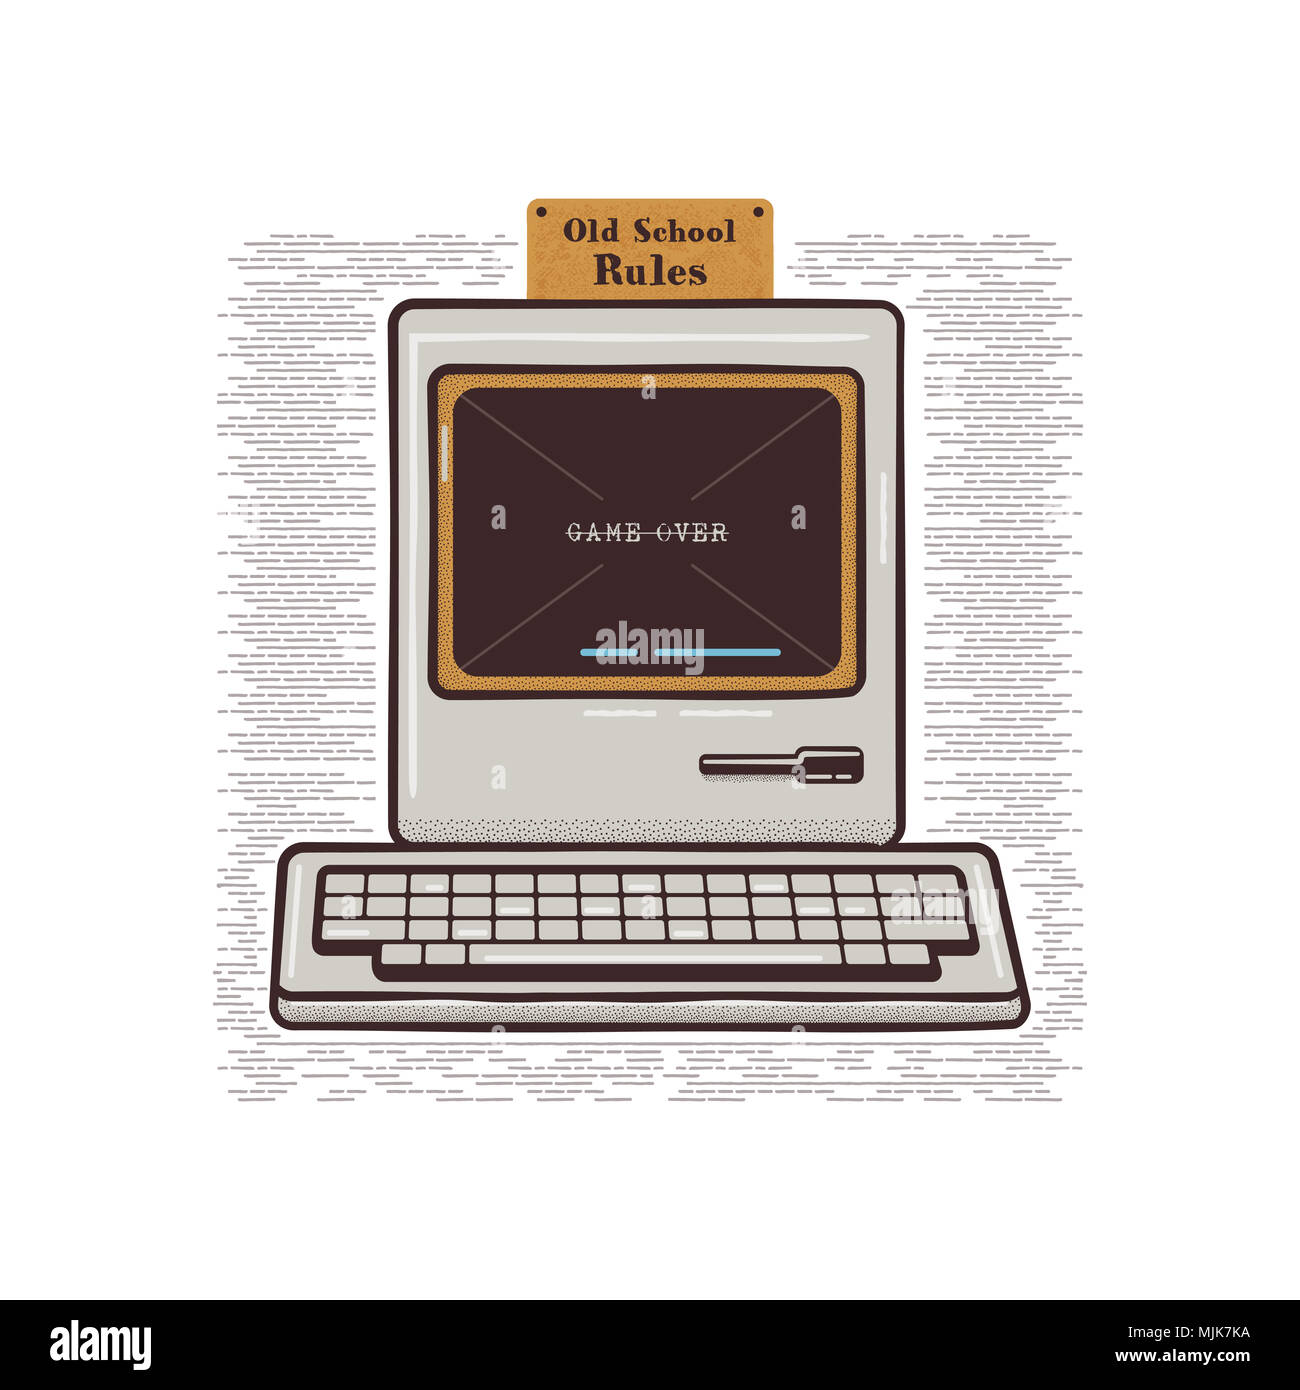 Vintage Hand Drawn Personal Computer With Keyboard. Old classic pc with sign - Old School Rules. Retro technology icon. Stock Illustration, tee design, t shirt isolated on white background Stock Photo